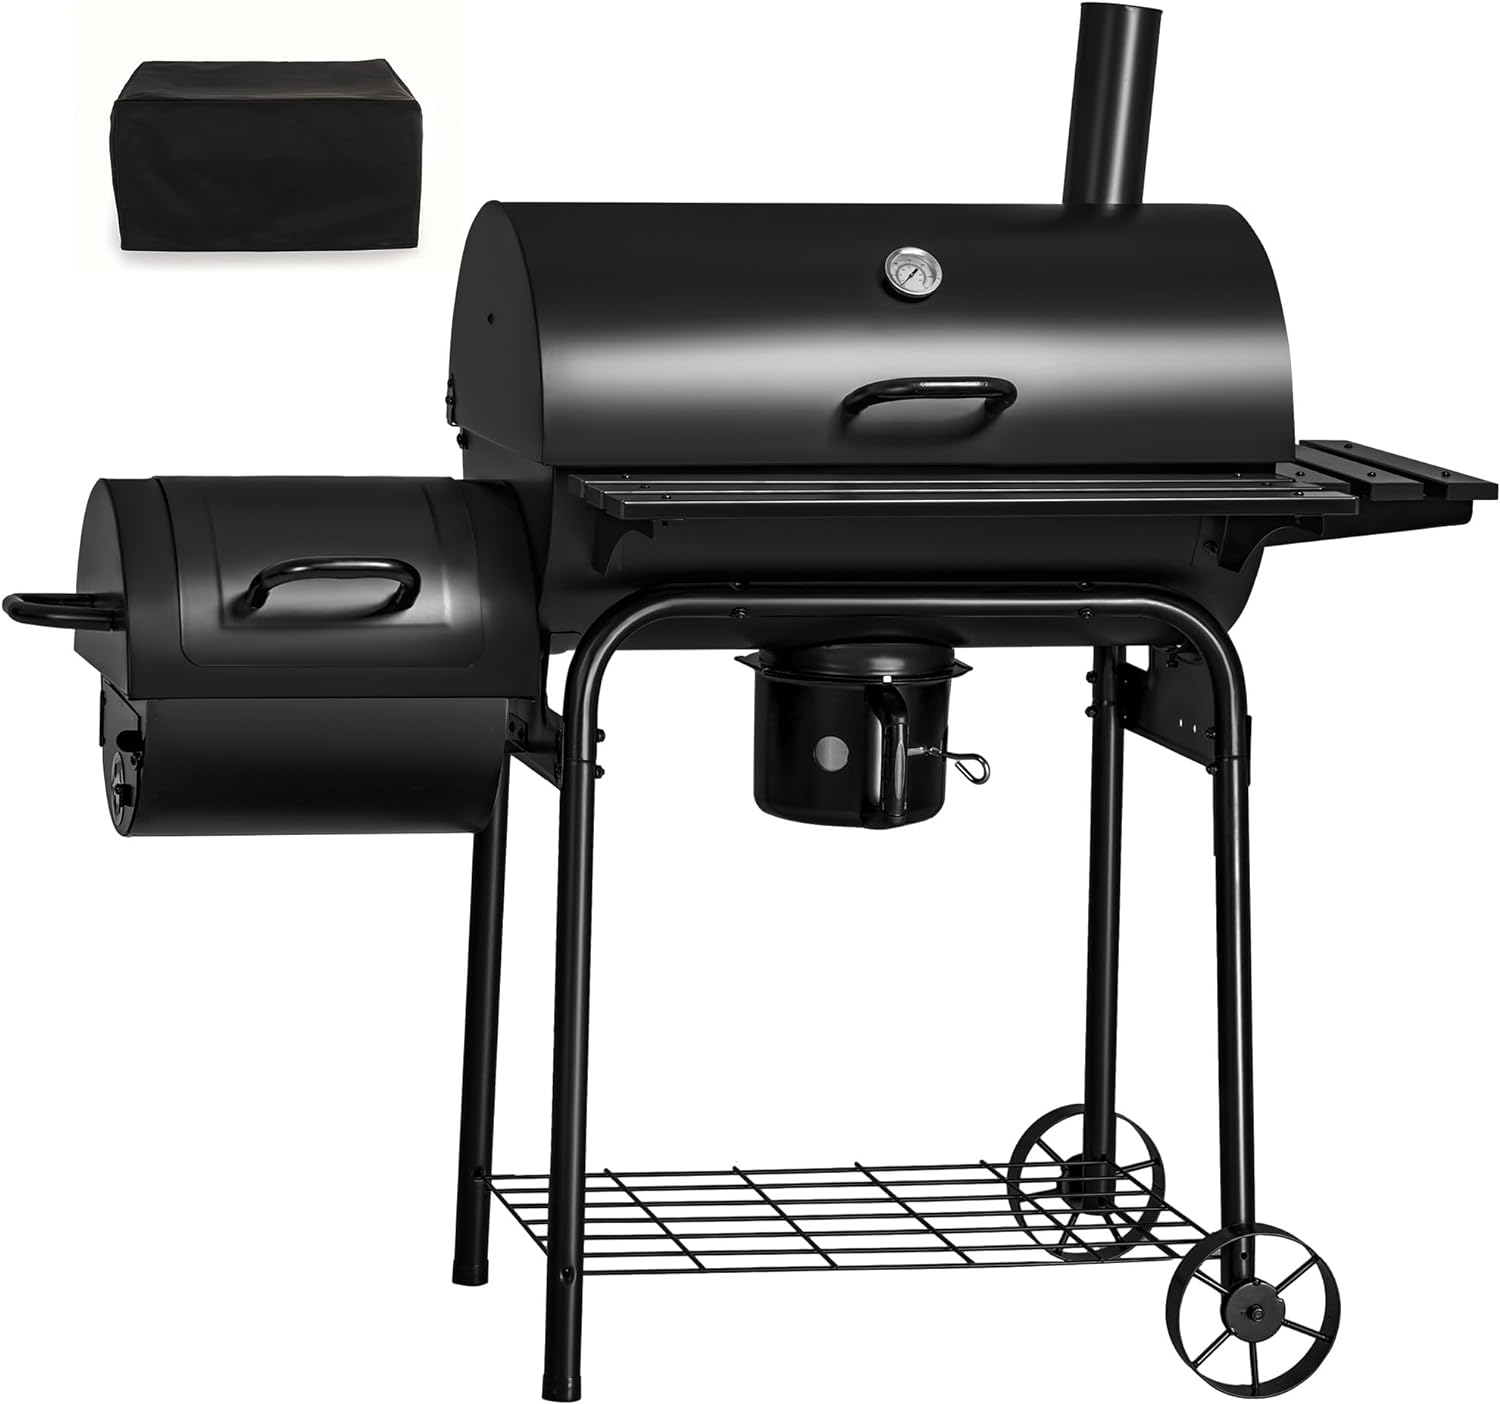 Flamaker Barbecue Grill Offset Smoker